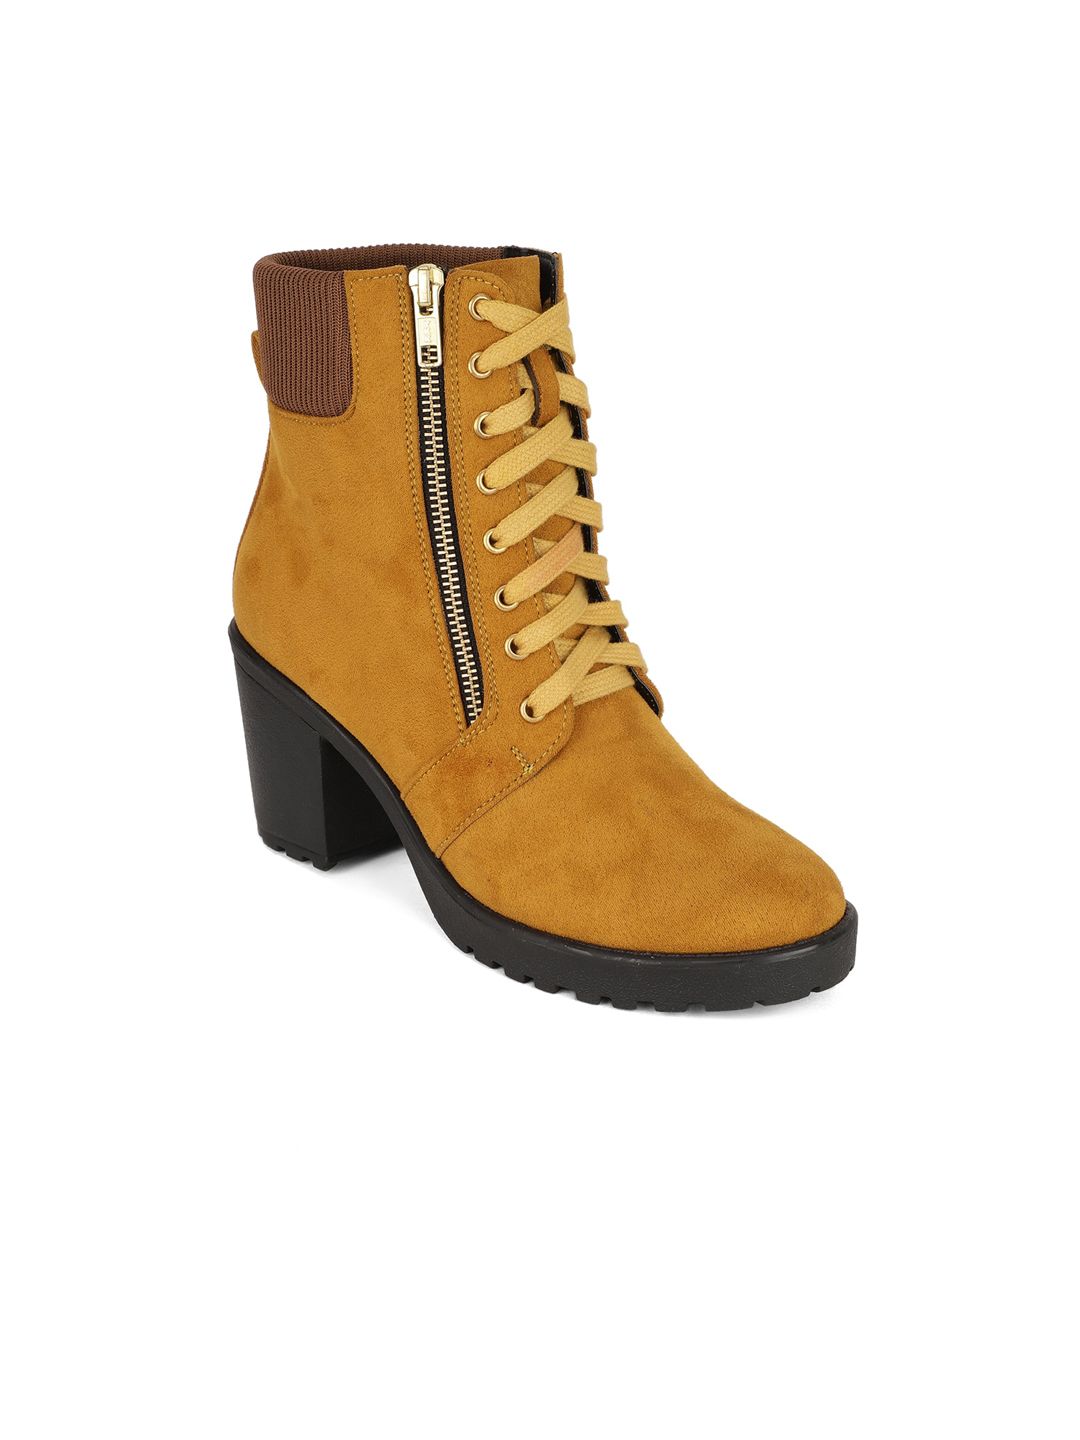 Bruno Manetti Camel Brown Suede Block Heeled Boots Price in India